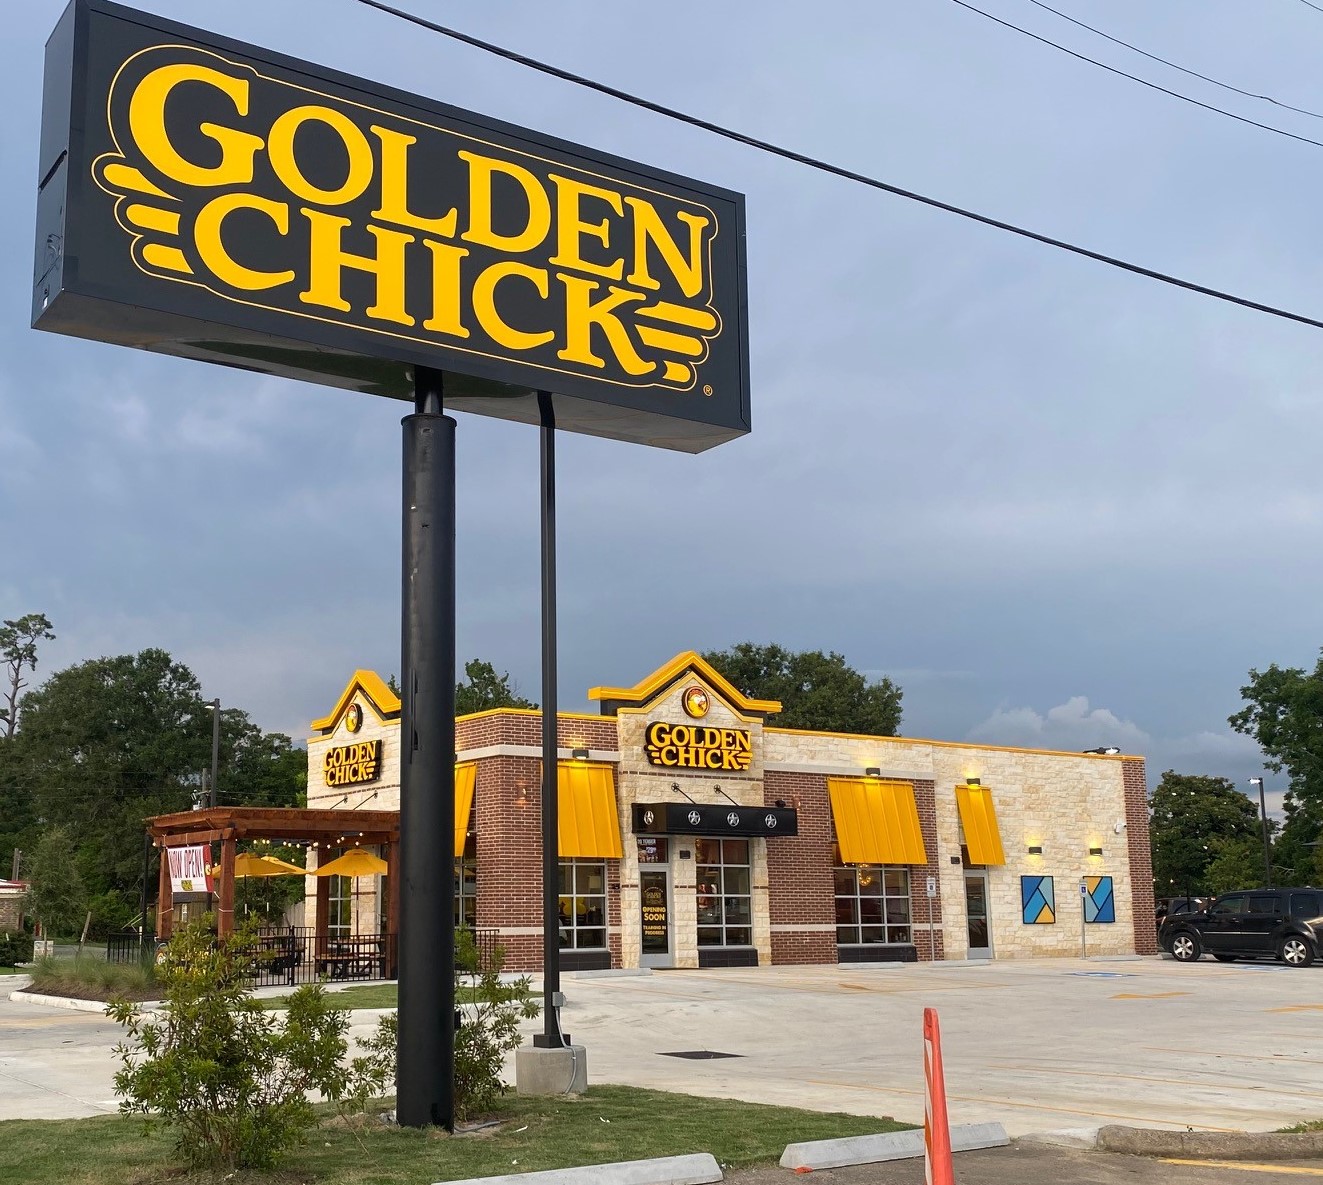 Golden Chick storefront.  Your local Golden Chick fast food restaurant in Orange, Texas